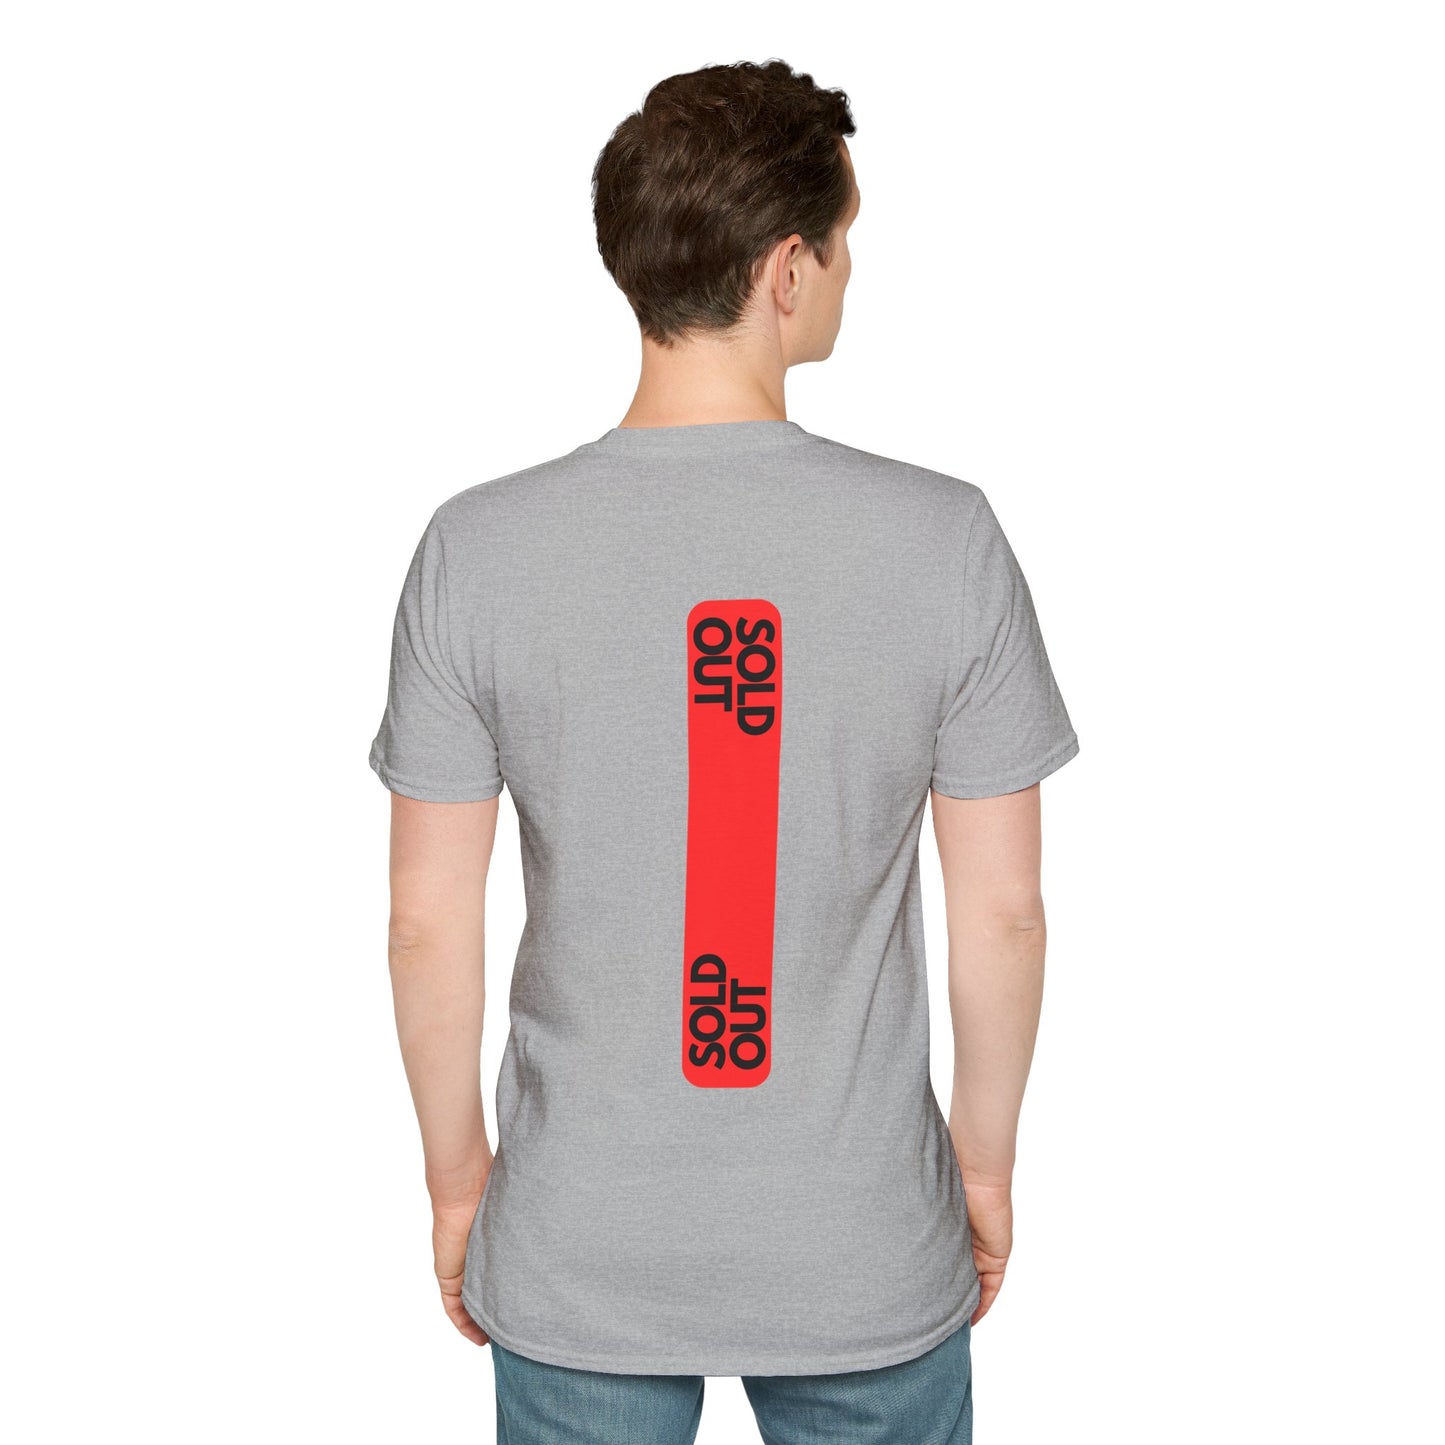 Light Grey T-shirt with a striking red tag design and the text ‘SOLD OUT’ in bold letters